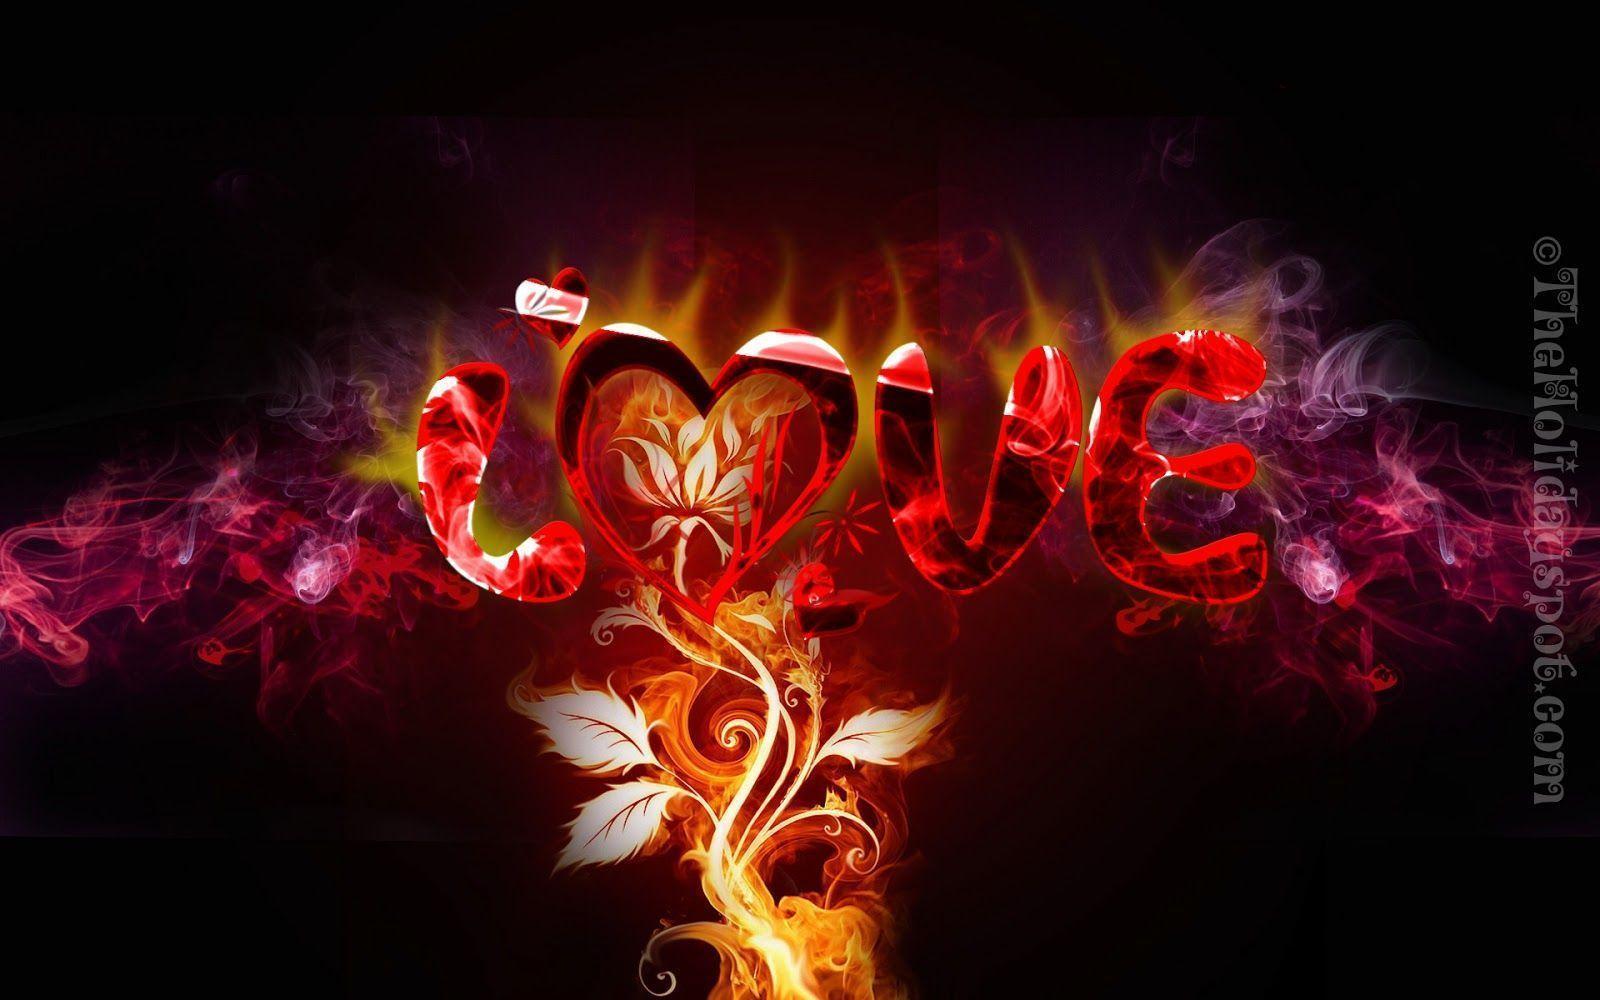 Love Pain full awesome Hot Wallpaper. Natural Wallpaper. Latest